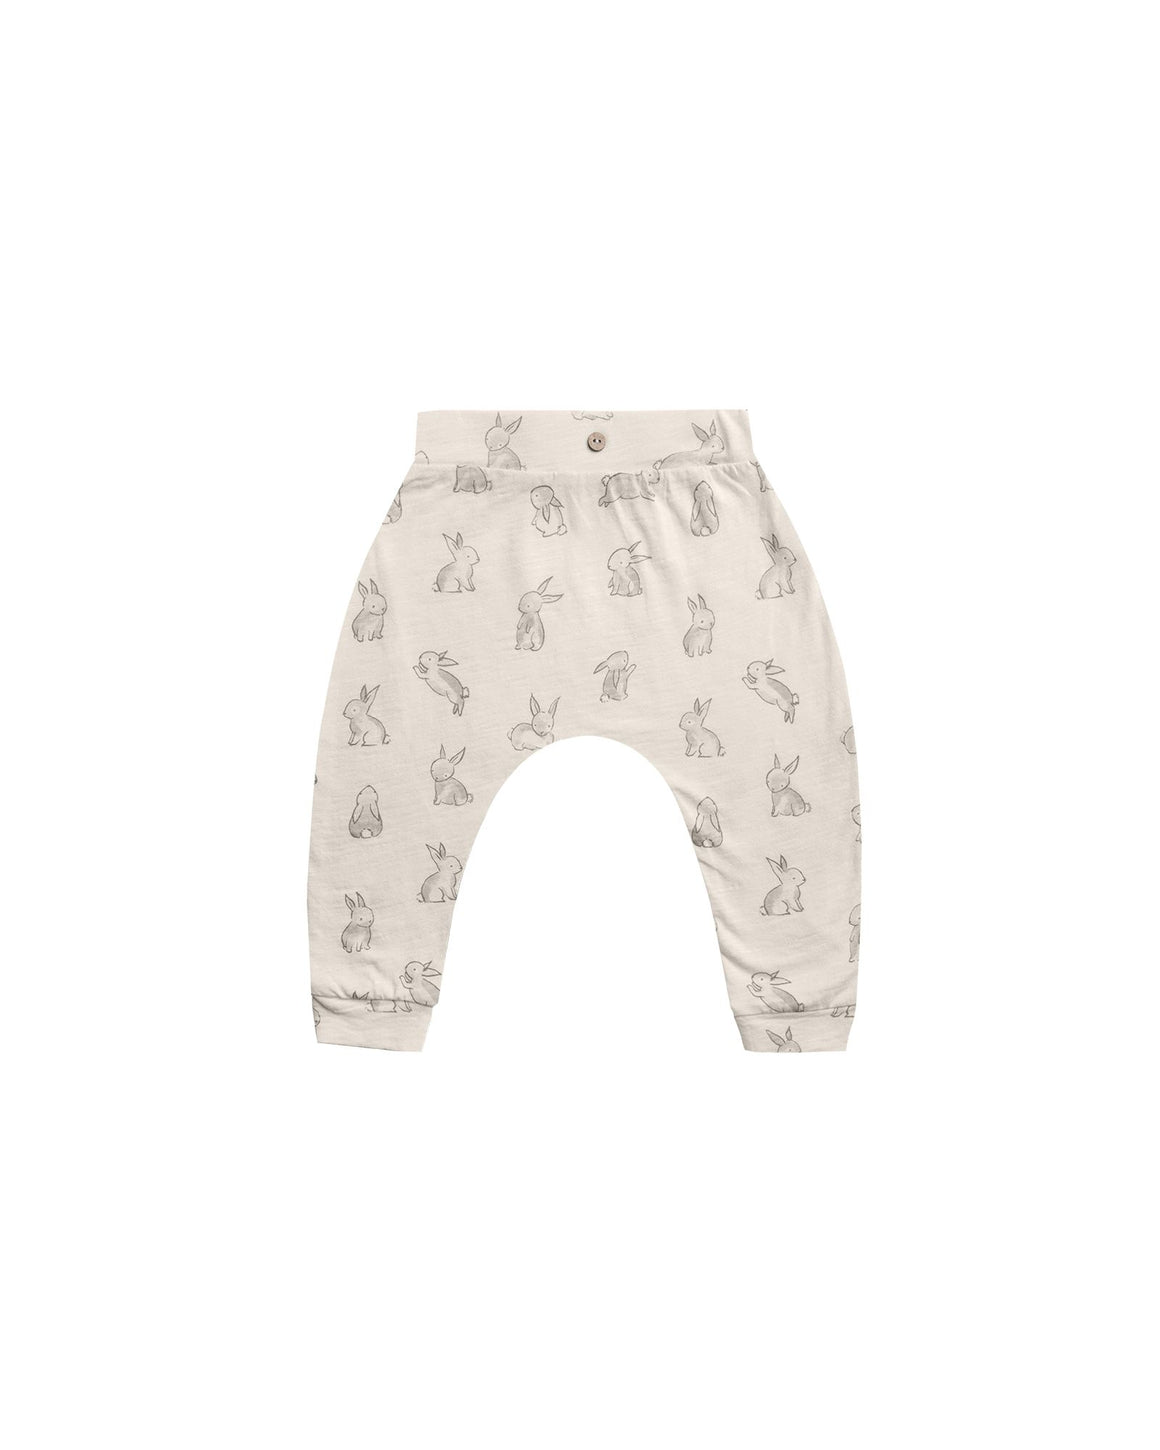 Slouch Pant - Bunnies